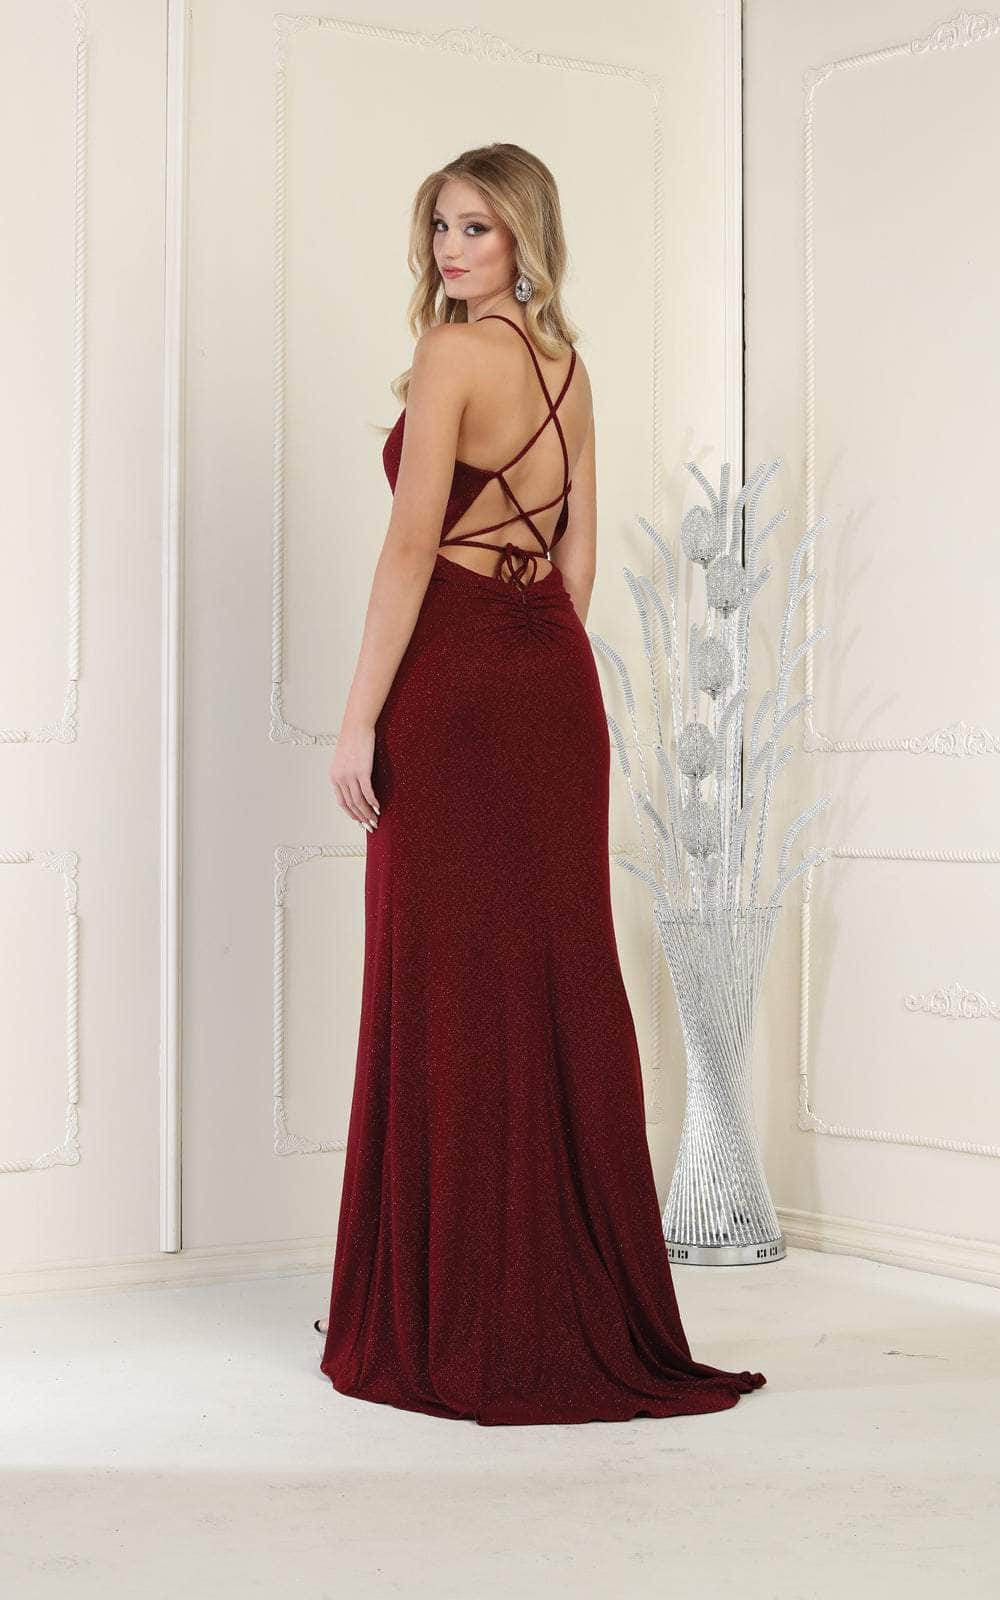 May Queen MQ1987 - Lace-Up Back Sleeveless Prom Dress Special Occasion Dress